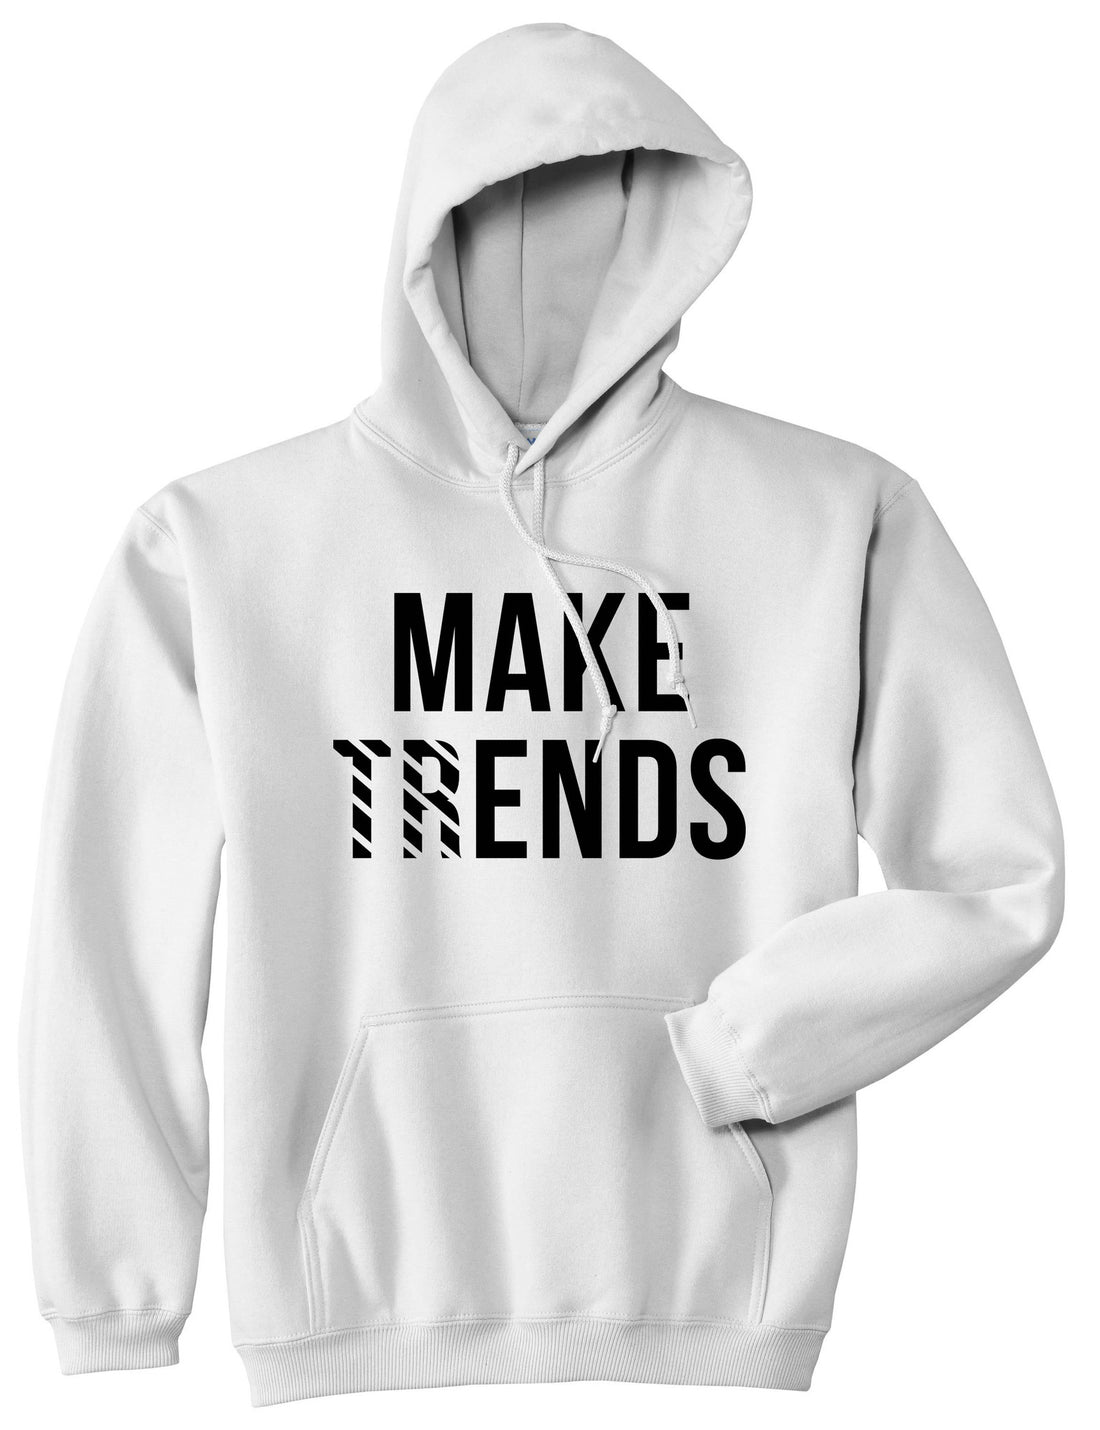 Make Trends Make Ends Boys Kids Pullover Hoodie Hoody in White by Kings Of NY